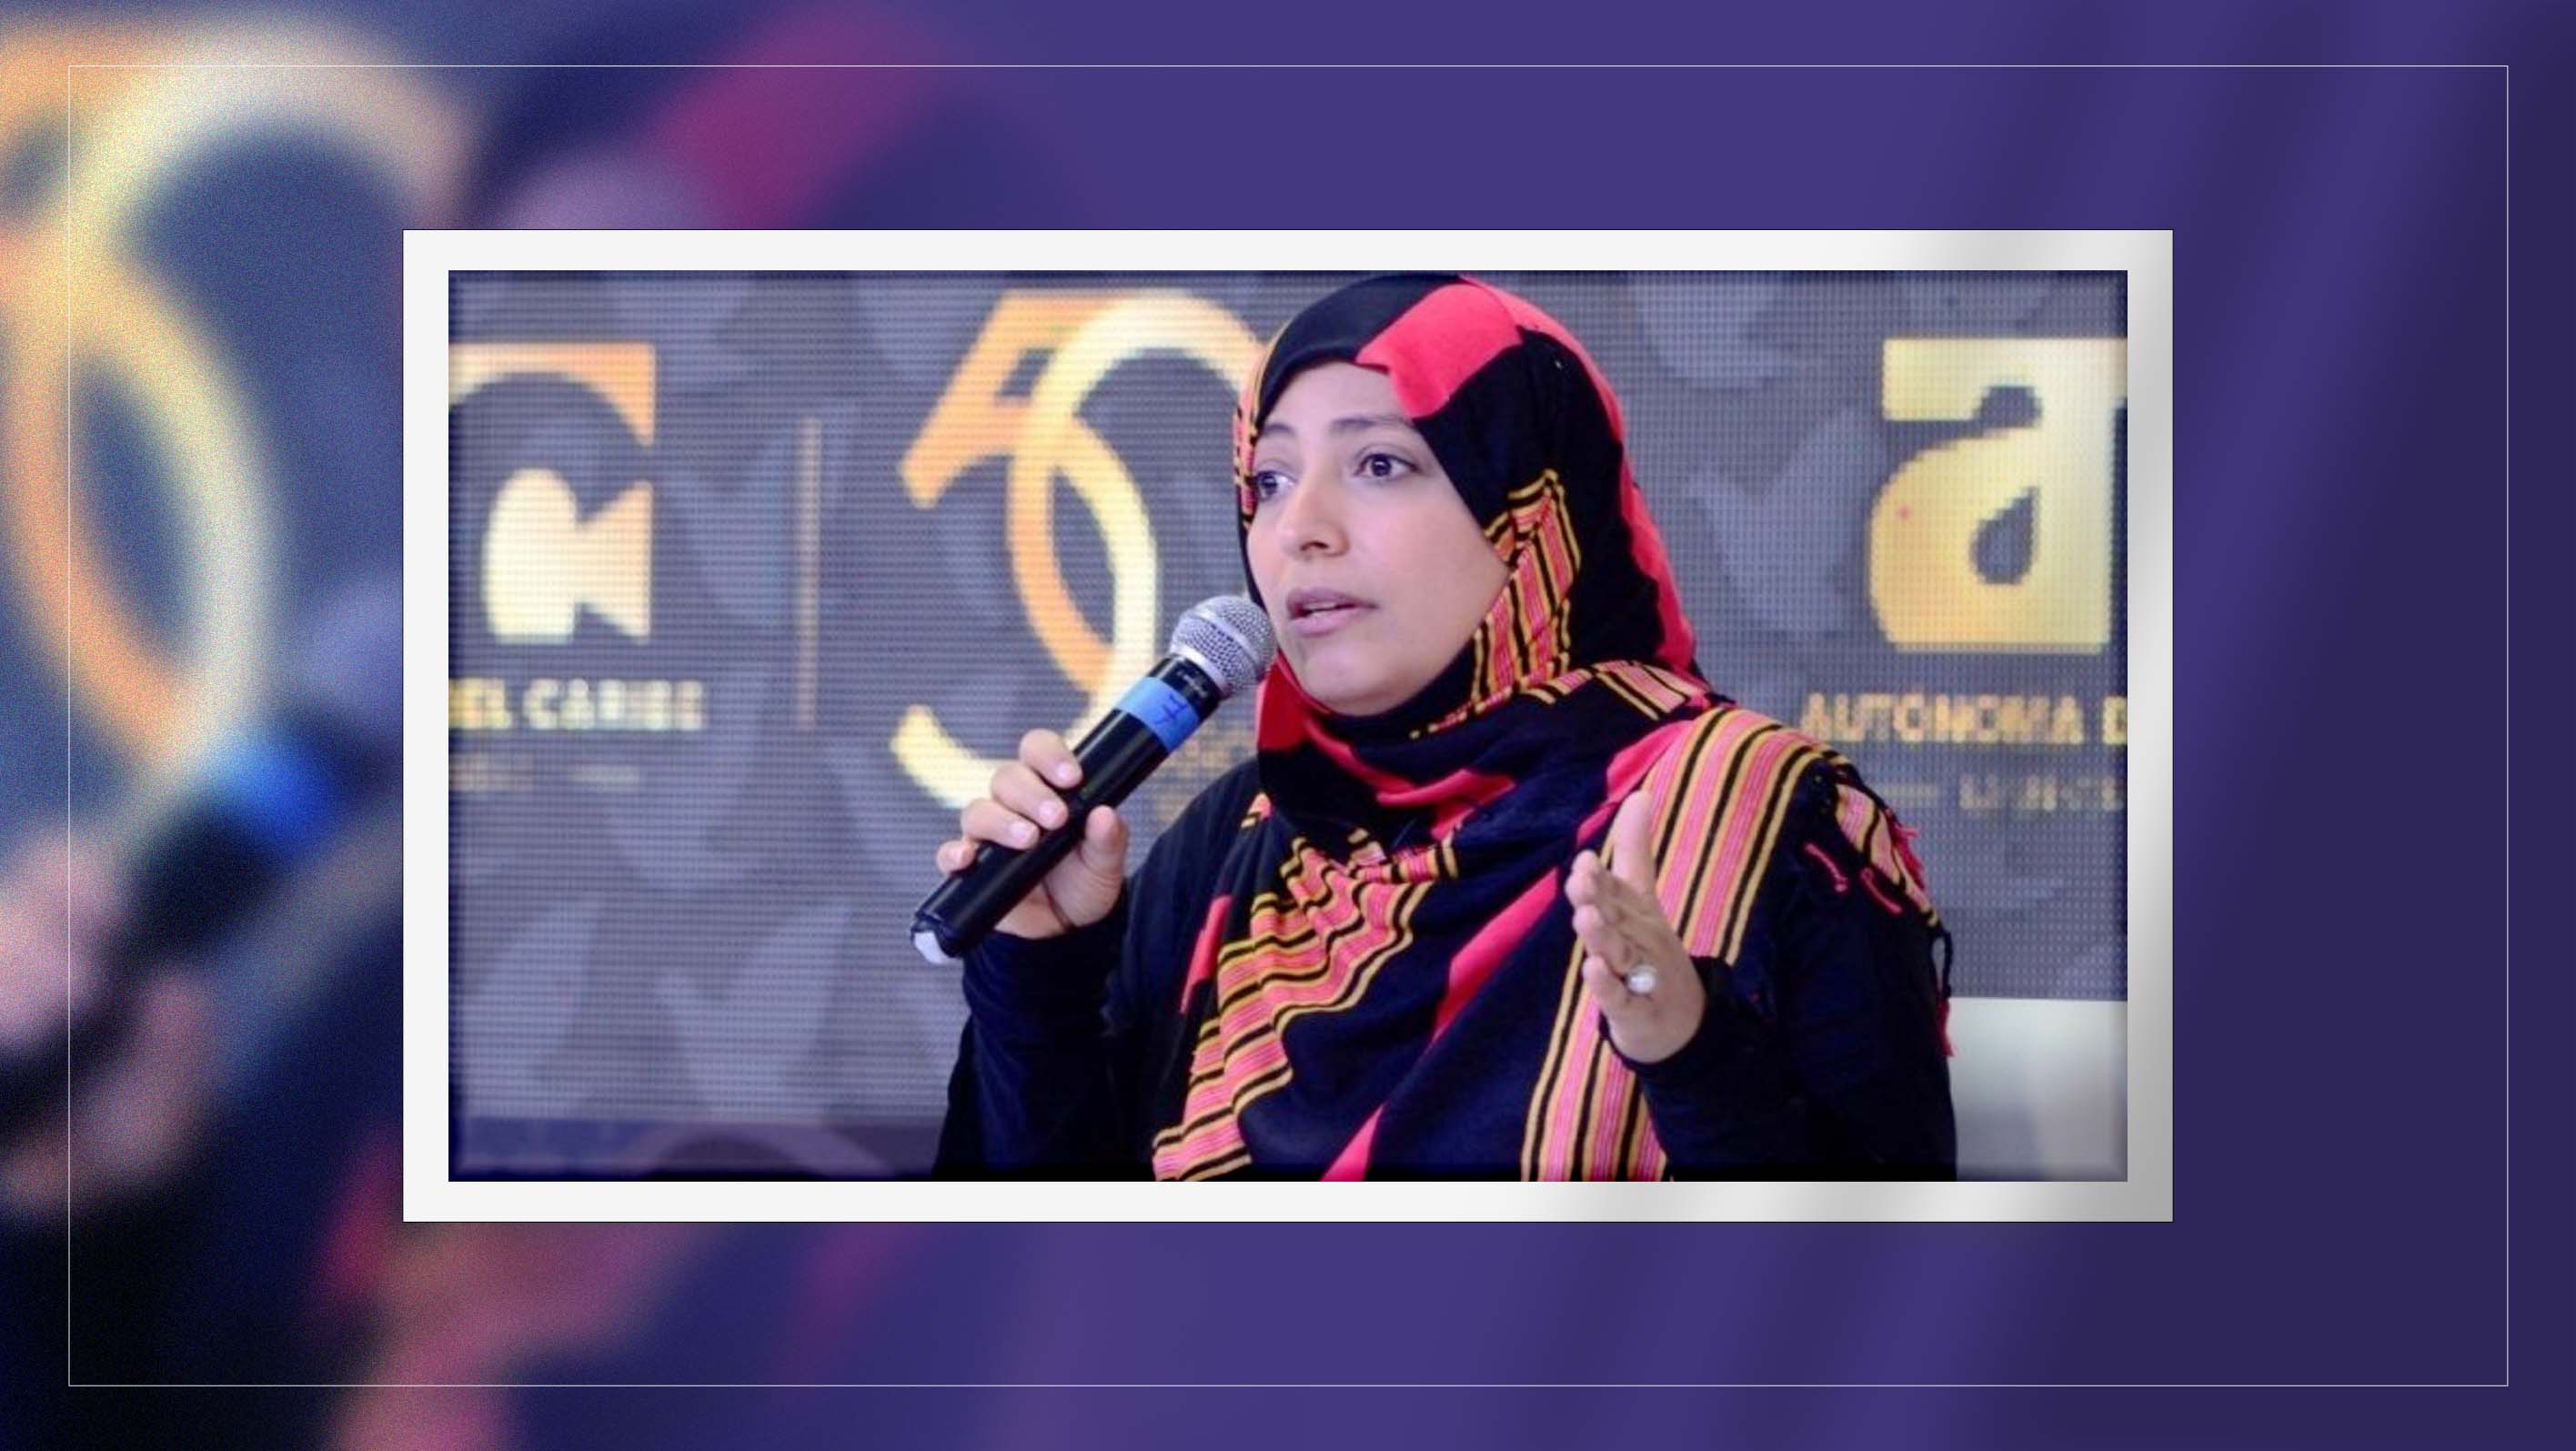 Tawakkol Karman talks about peace and the role of young people in the 21st century thinking conference in Colombia